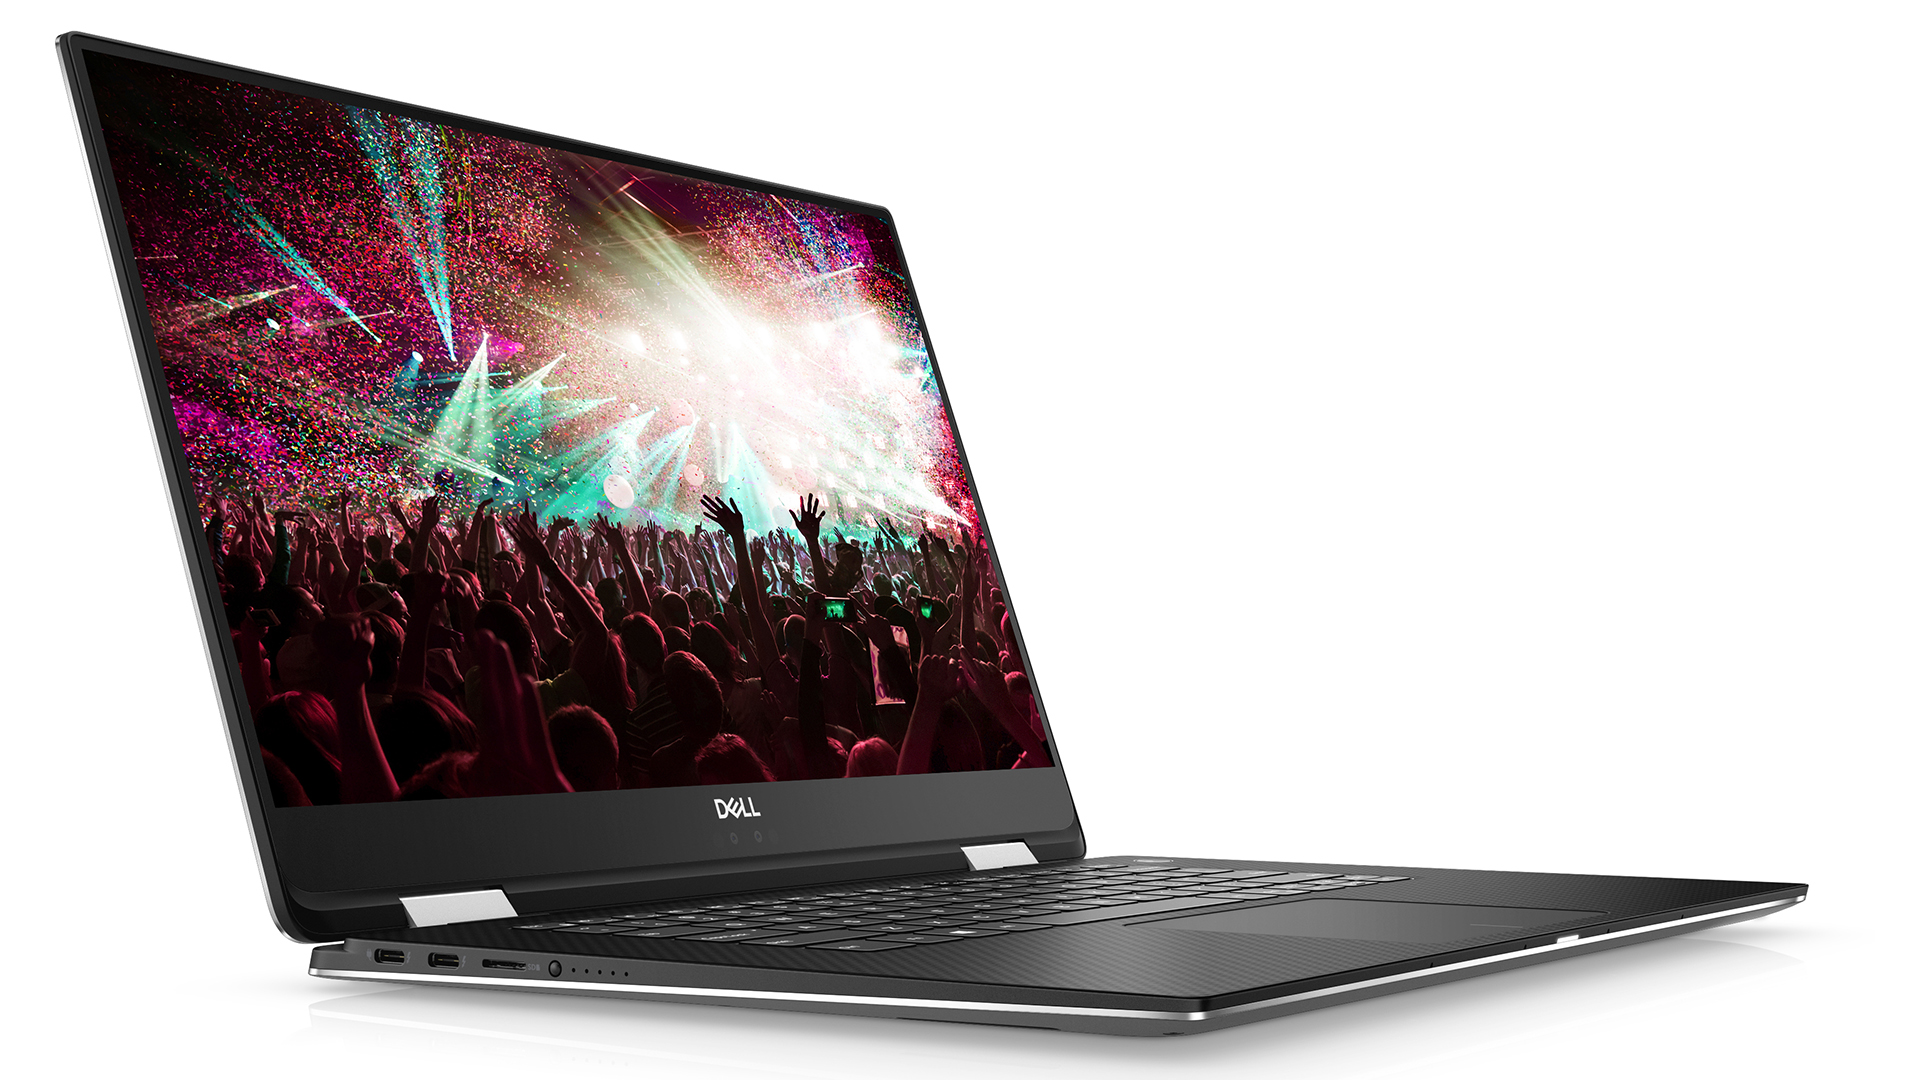 The best Dell laptops: Dell XPS 15 2-in-1